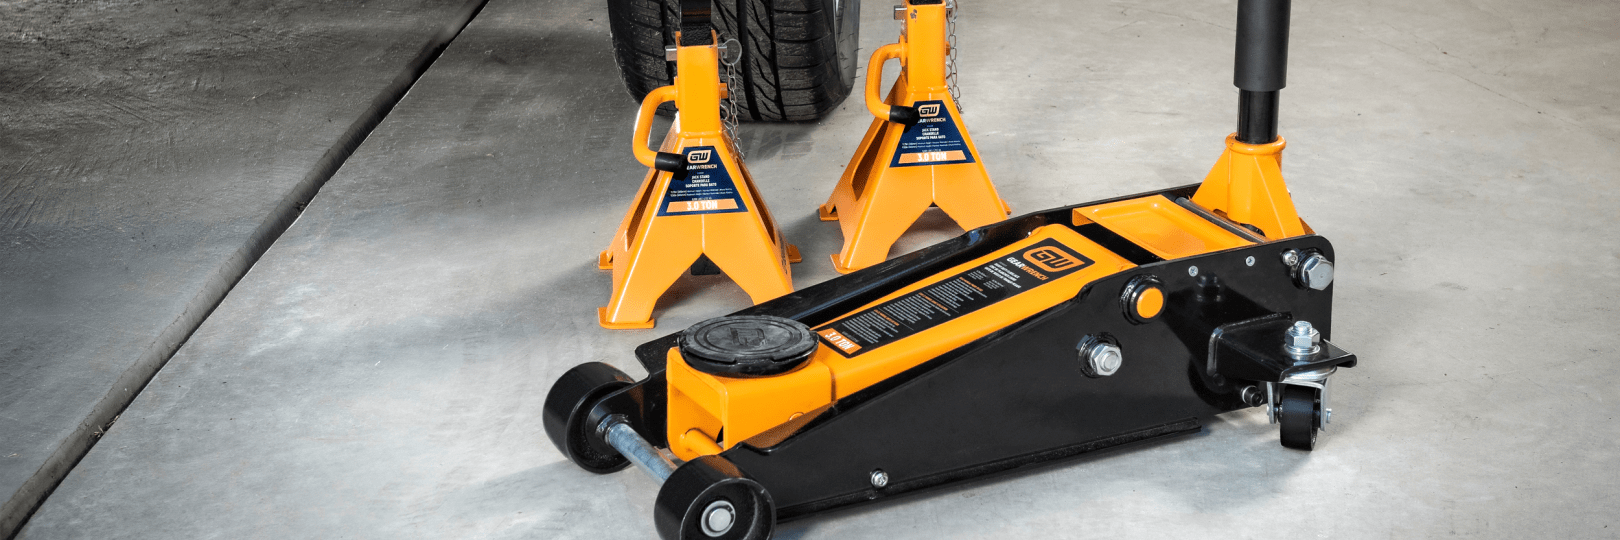 GEARWRENCH jack stands and floor jacks sitting in front of a car in a garage